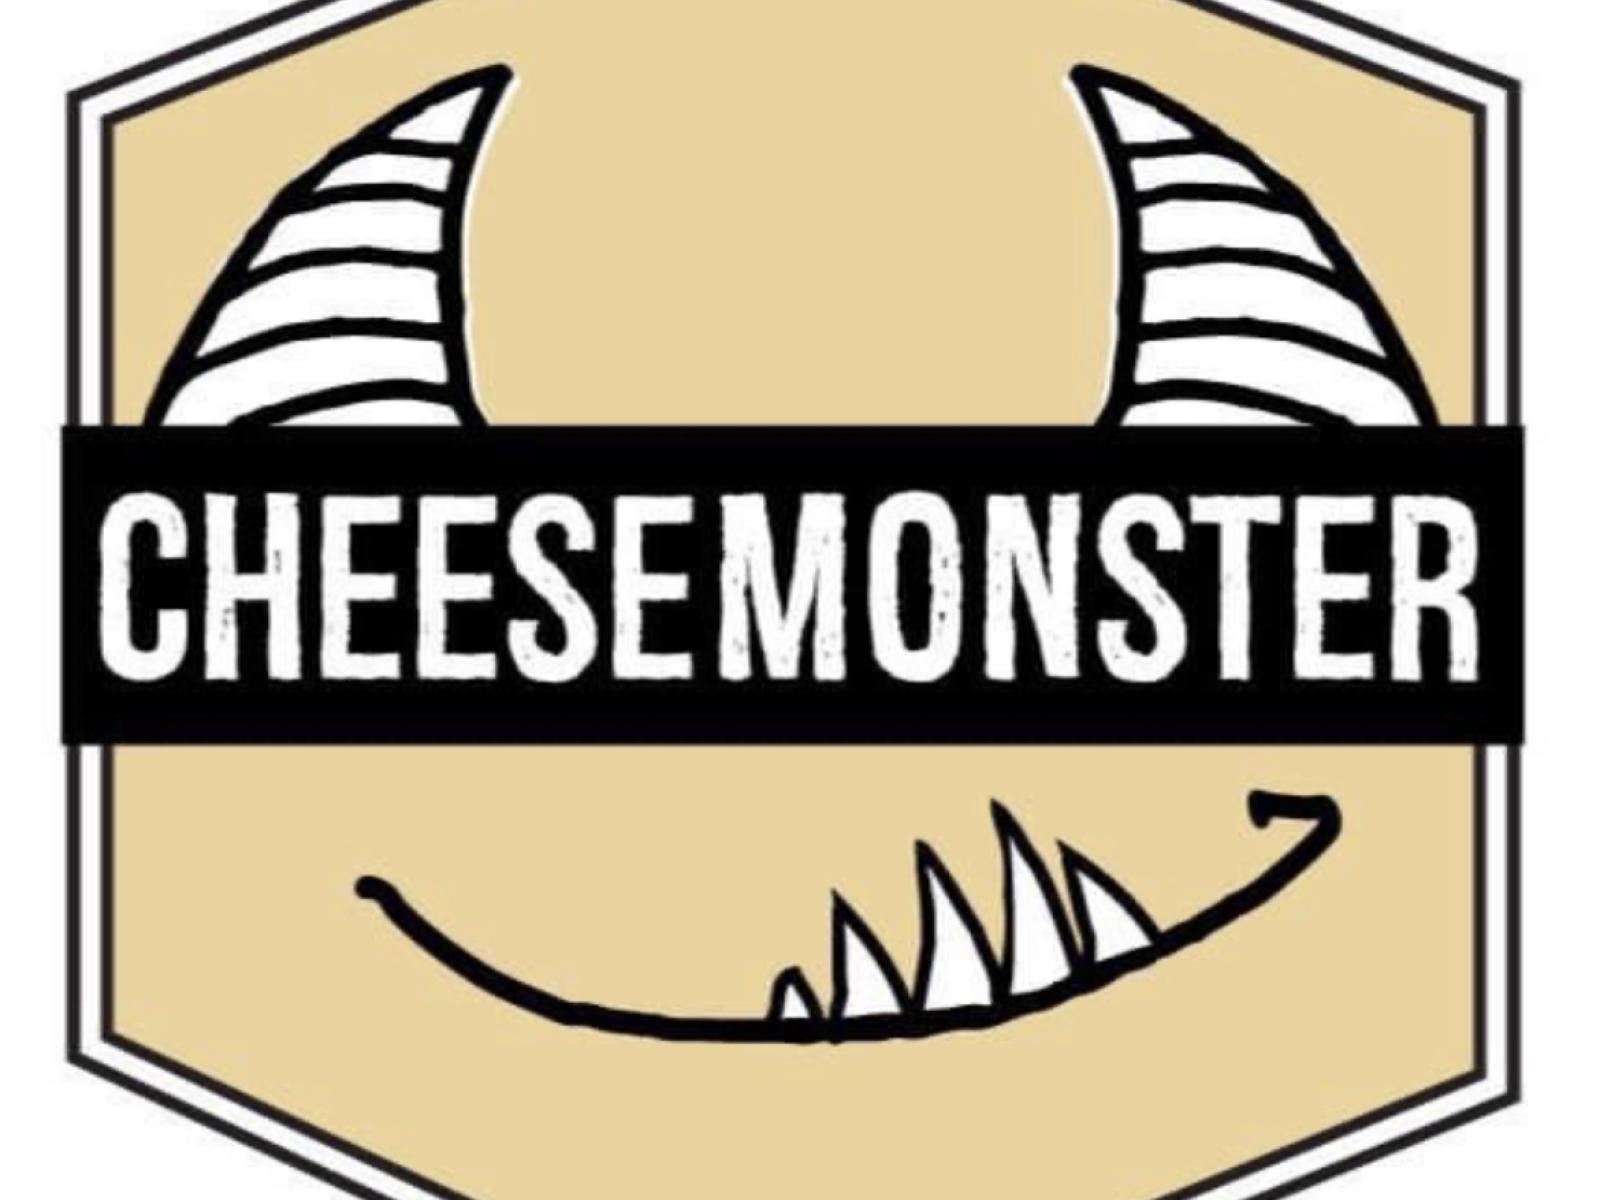 Main image for business titled Cheesemonster